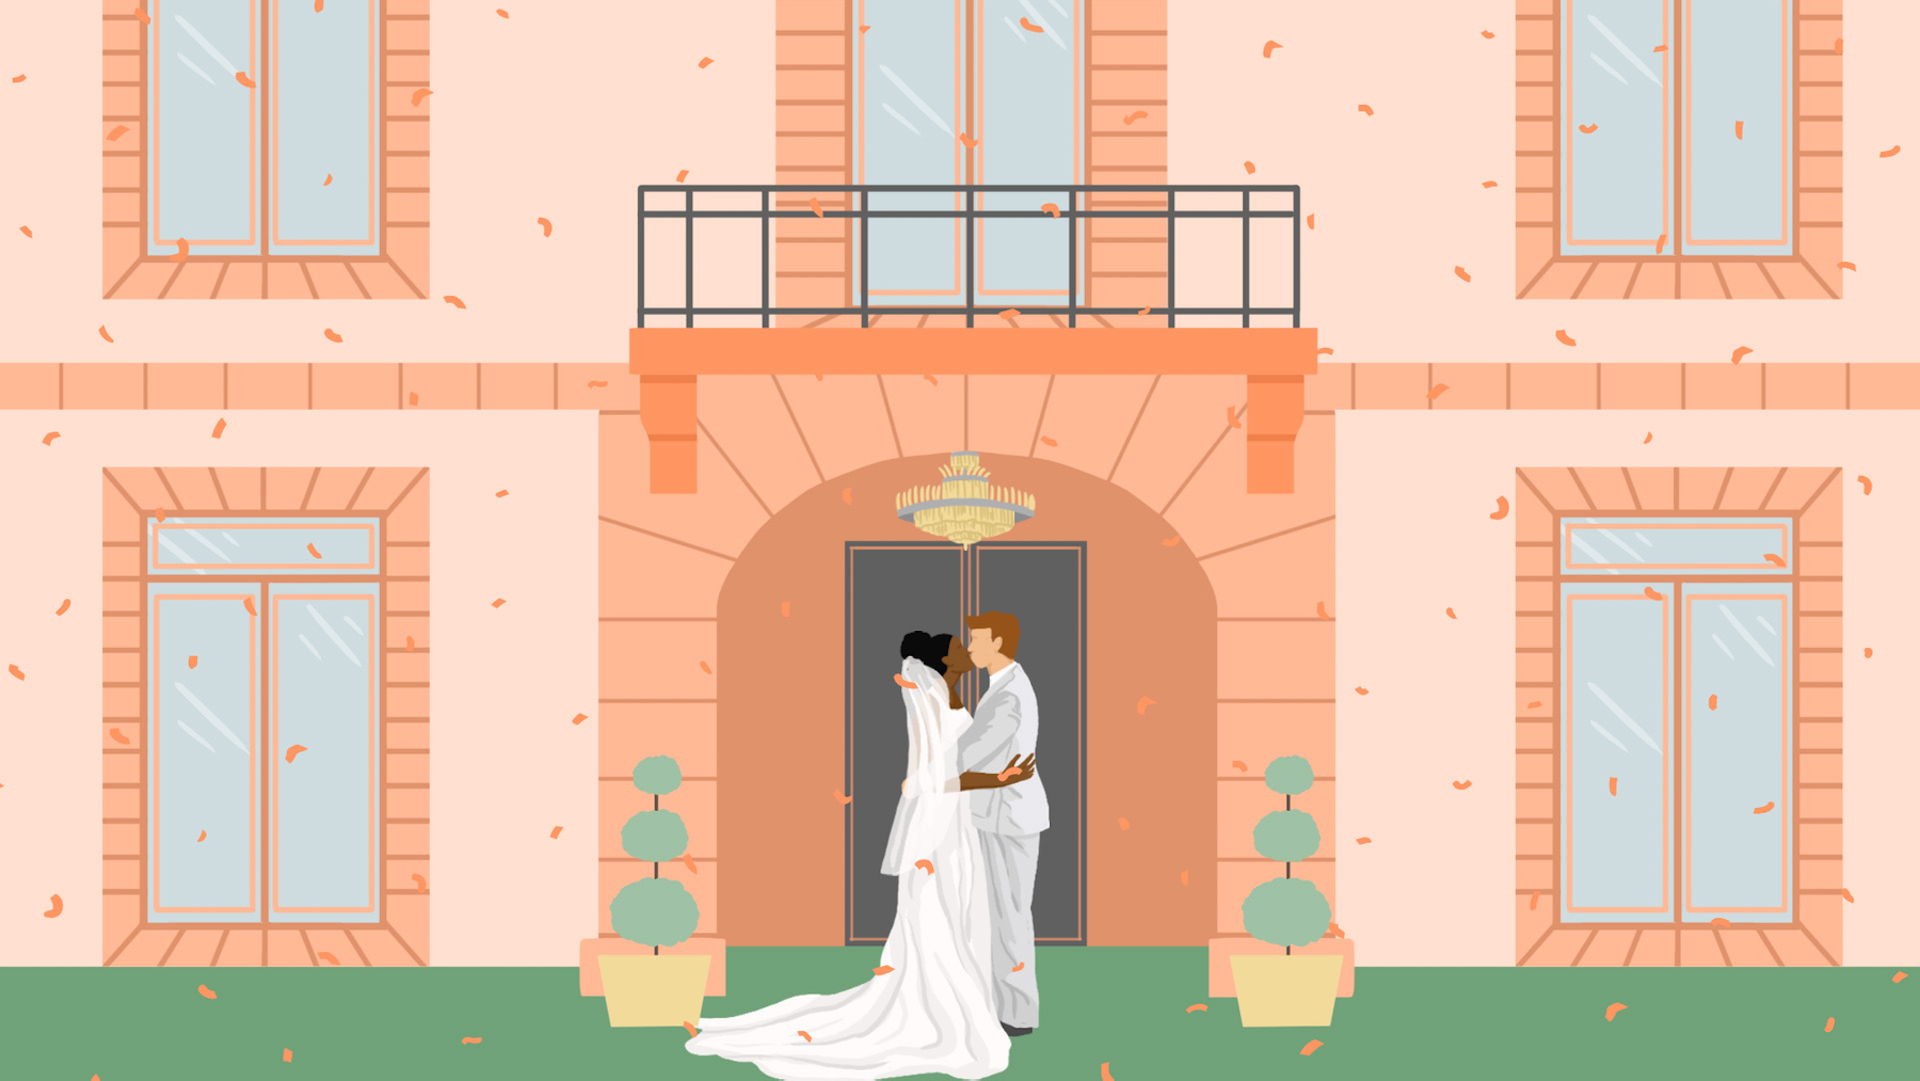 Illustration of bride and groom kissing outside of a brick wedding venue.